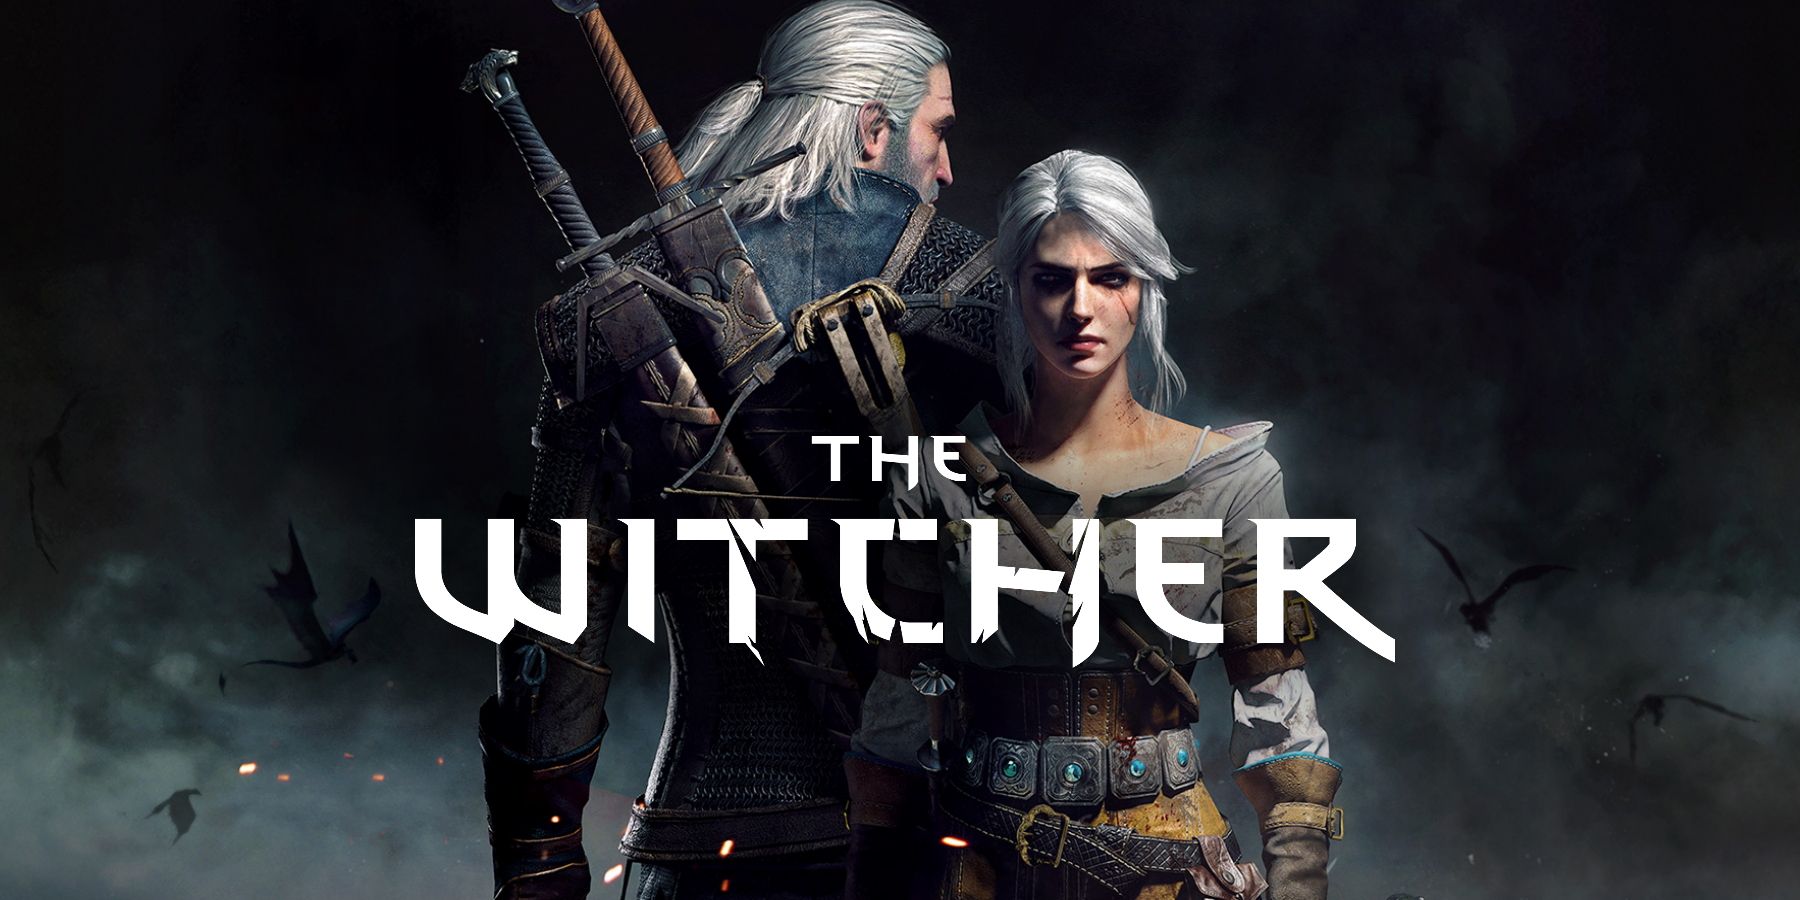 will there be a season 3 of the witcher